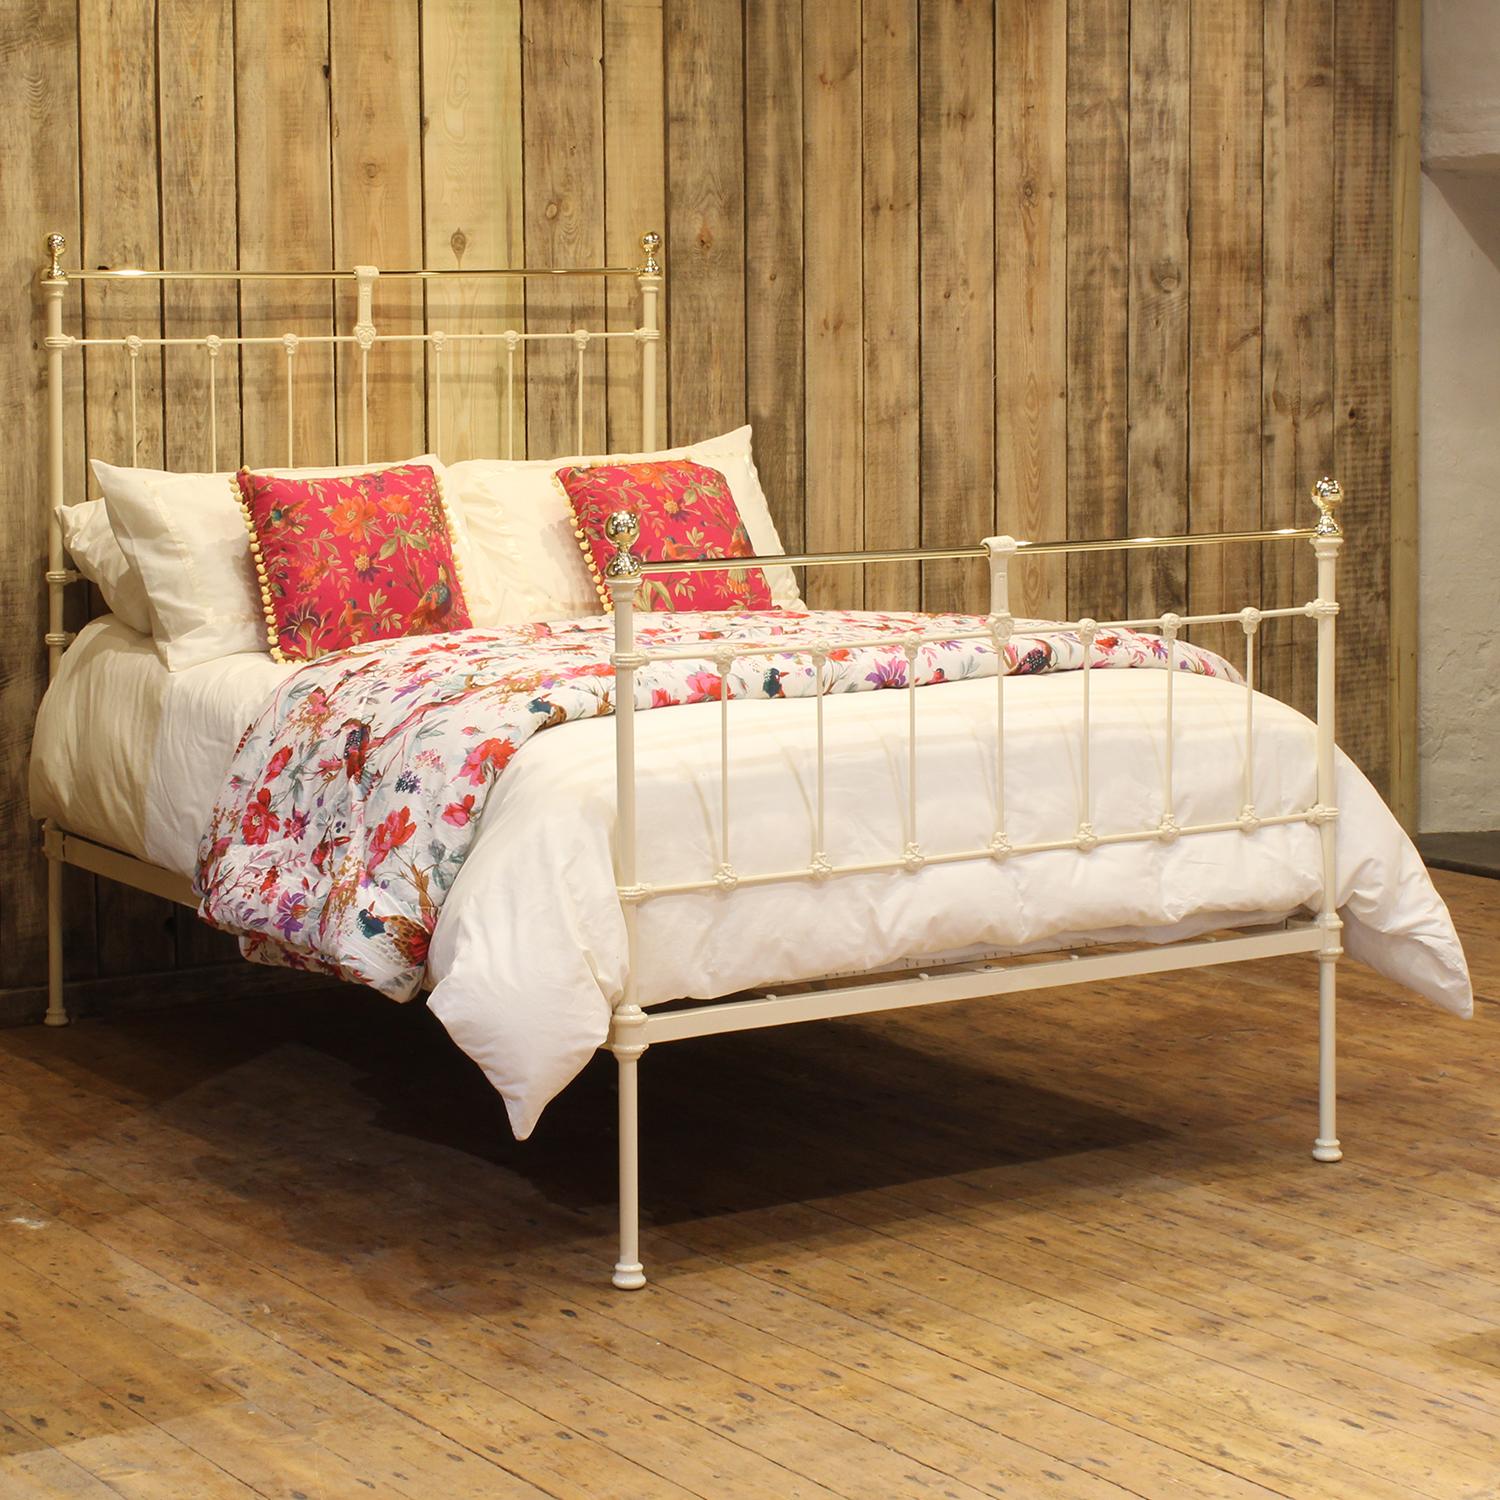 A Victorian cast iron bedstead finished in cream with dainty design, attractive castings and brass top rail, cap collars and knobs.

This bed accepts a double size 4ft 6in wide (54 inch or 135cm) base and mattress. 

The price includes a firm